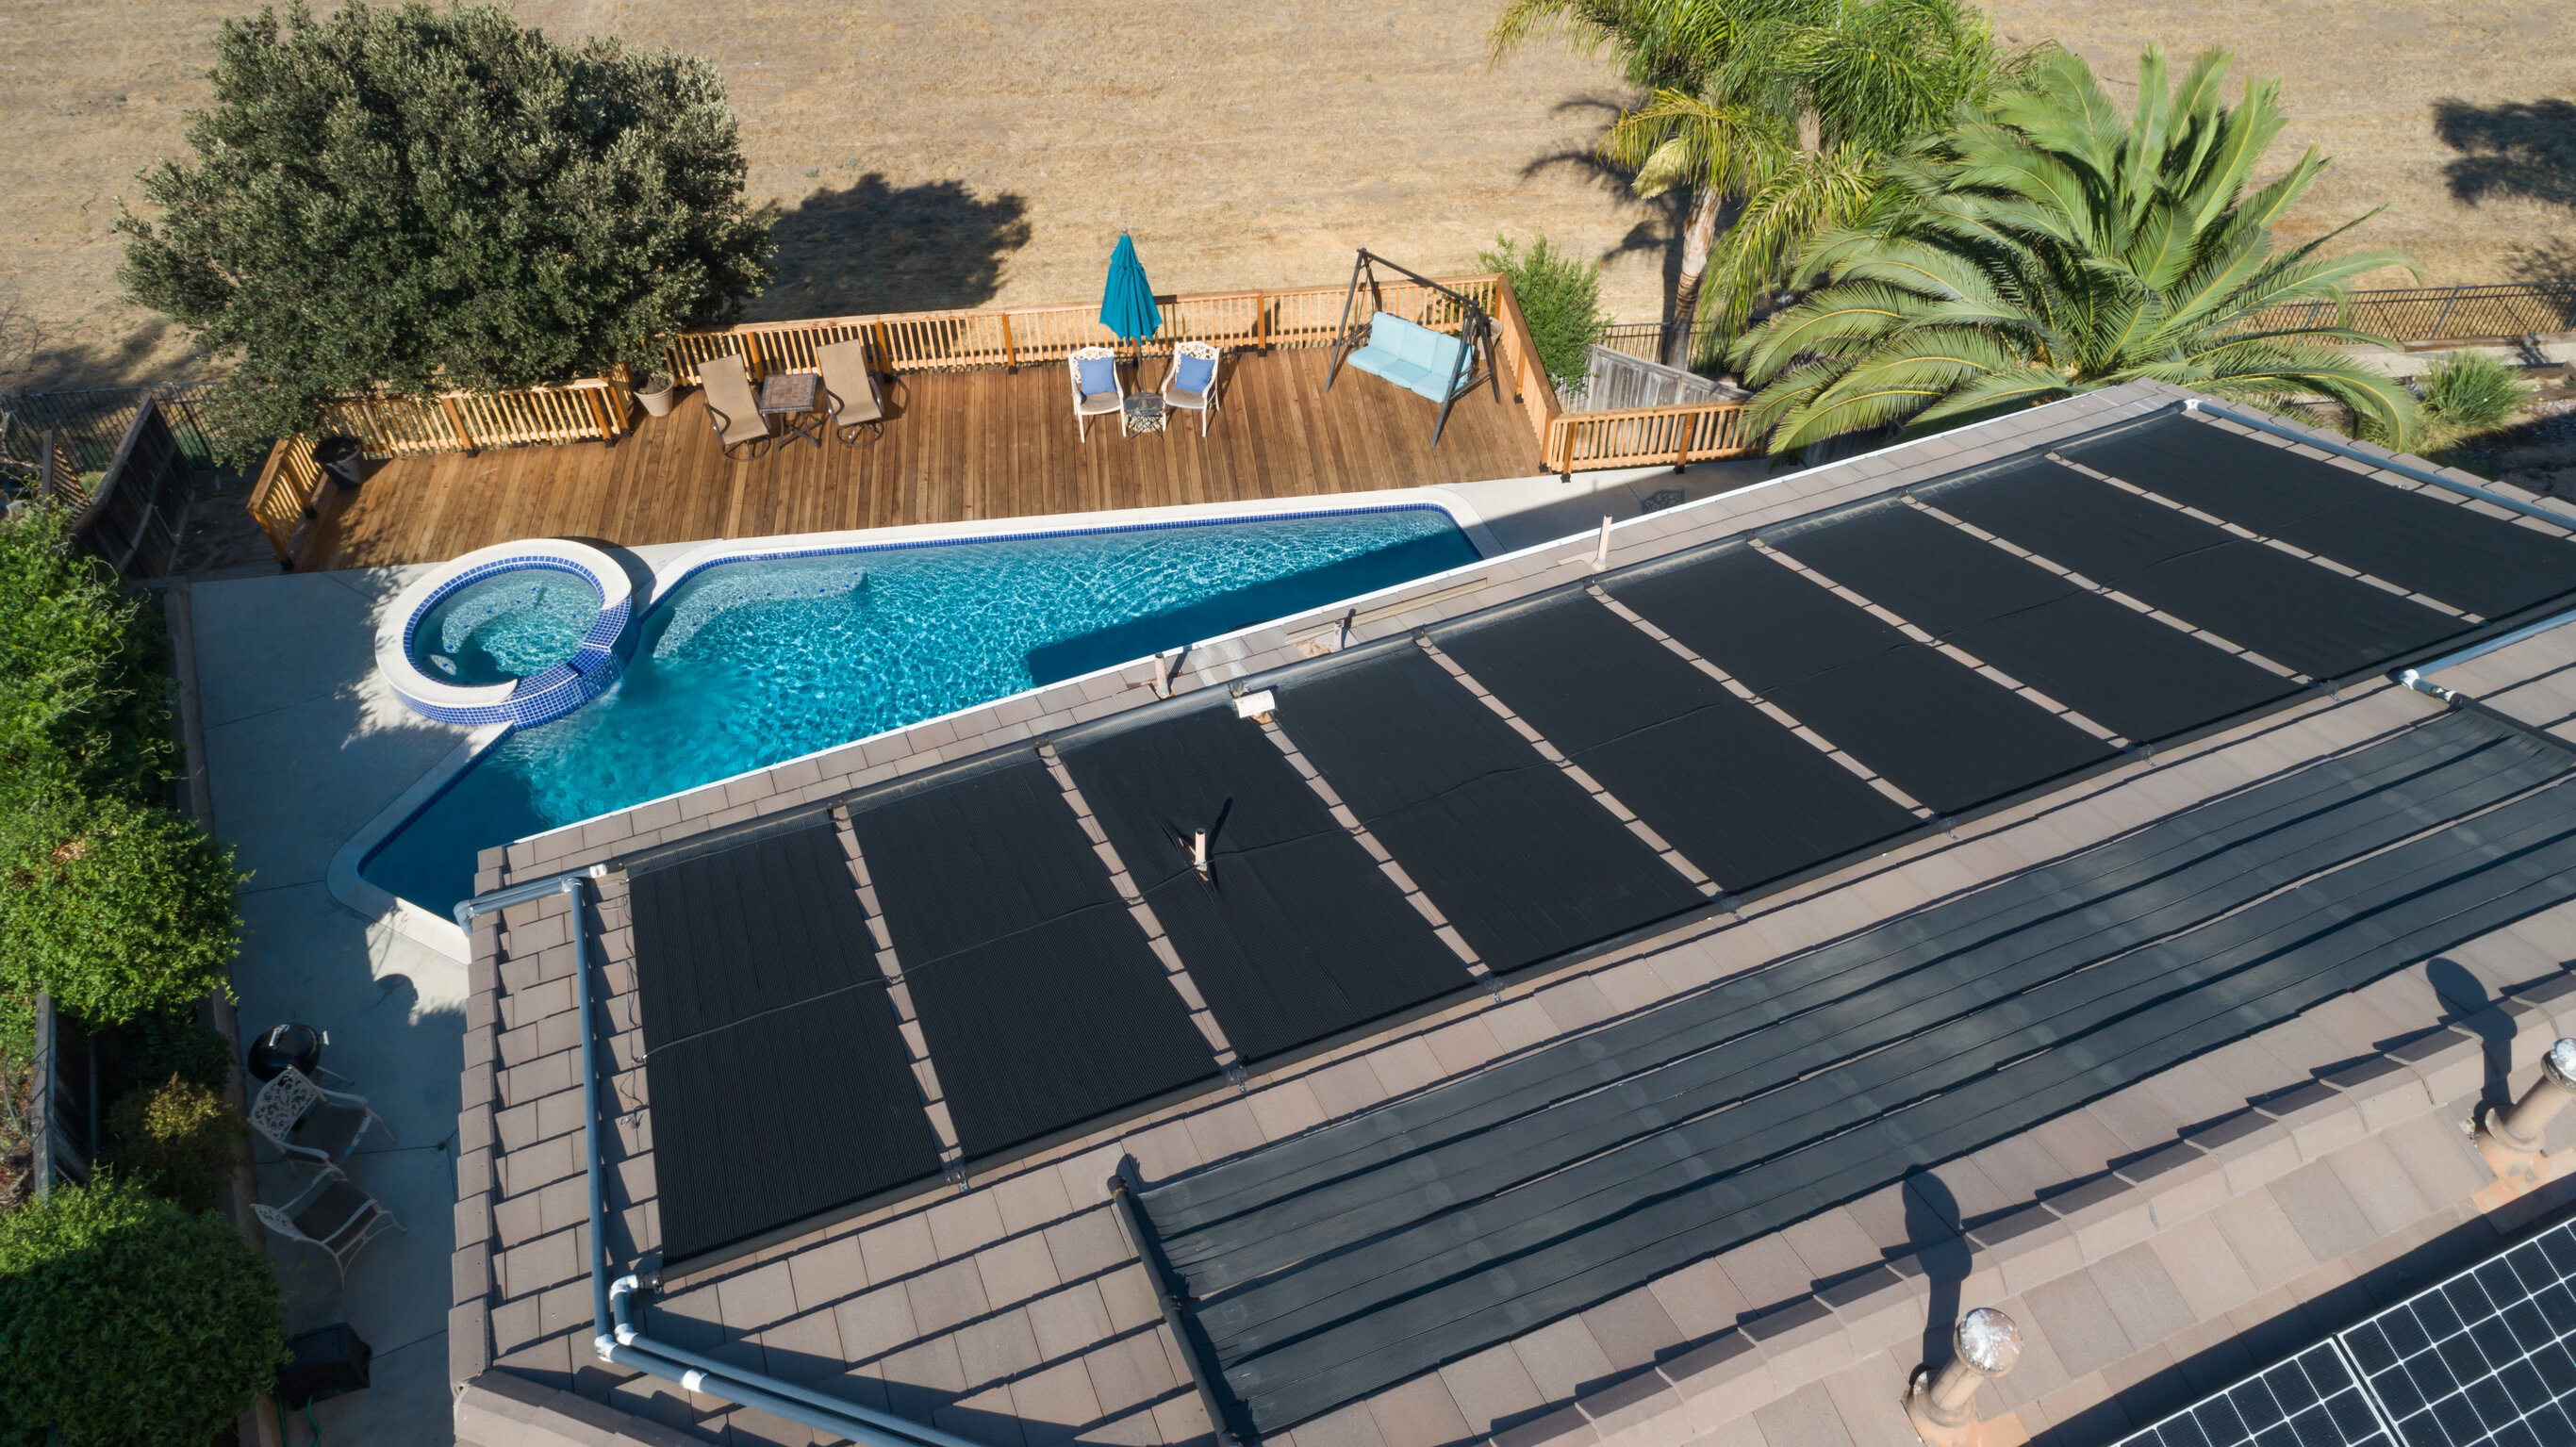 Solar panels on the roof of a home overlooking a pool in the backyard. 